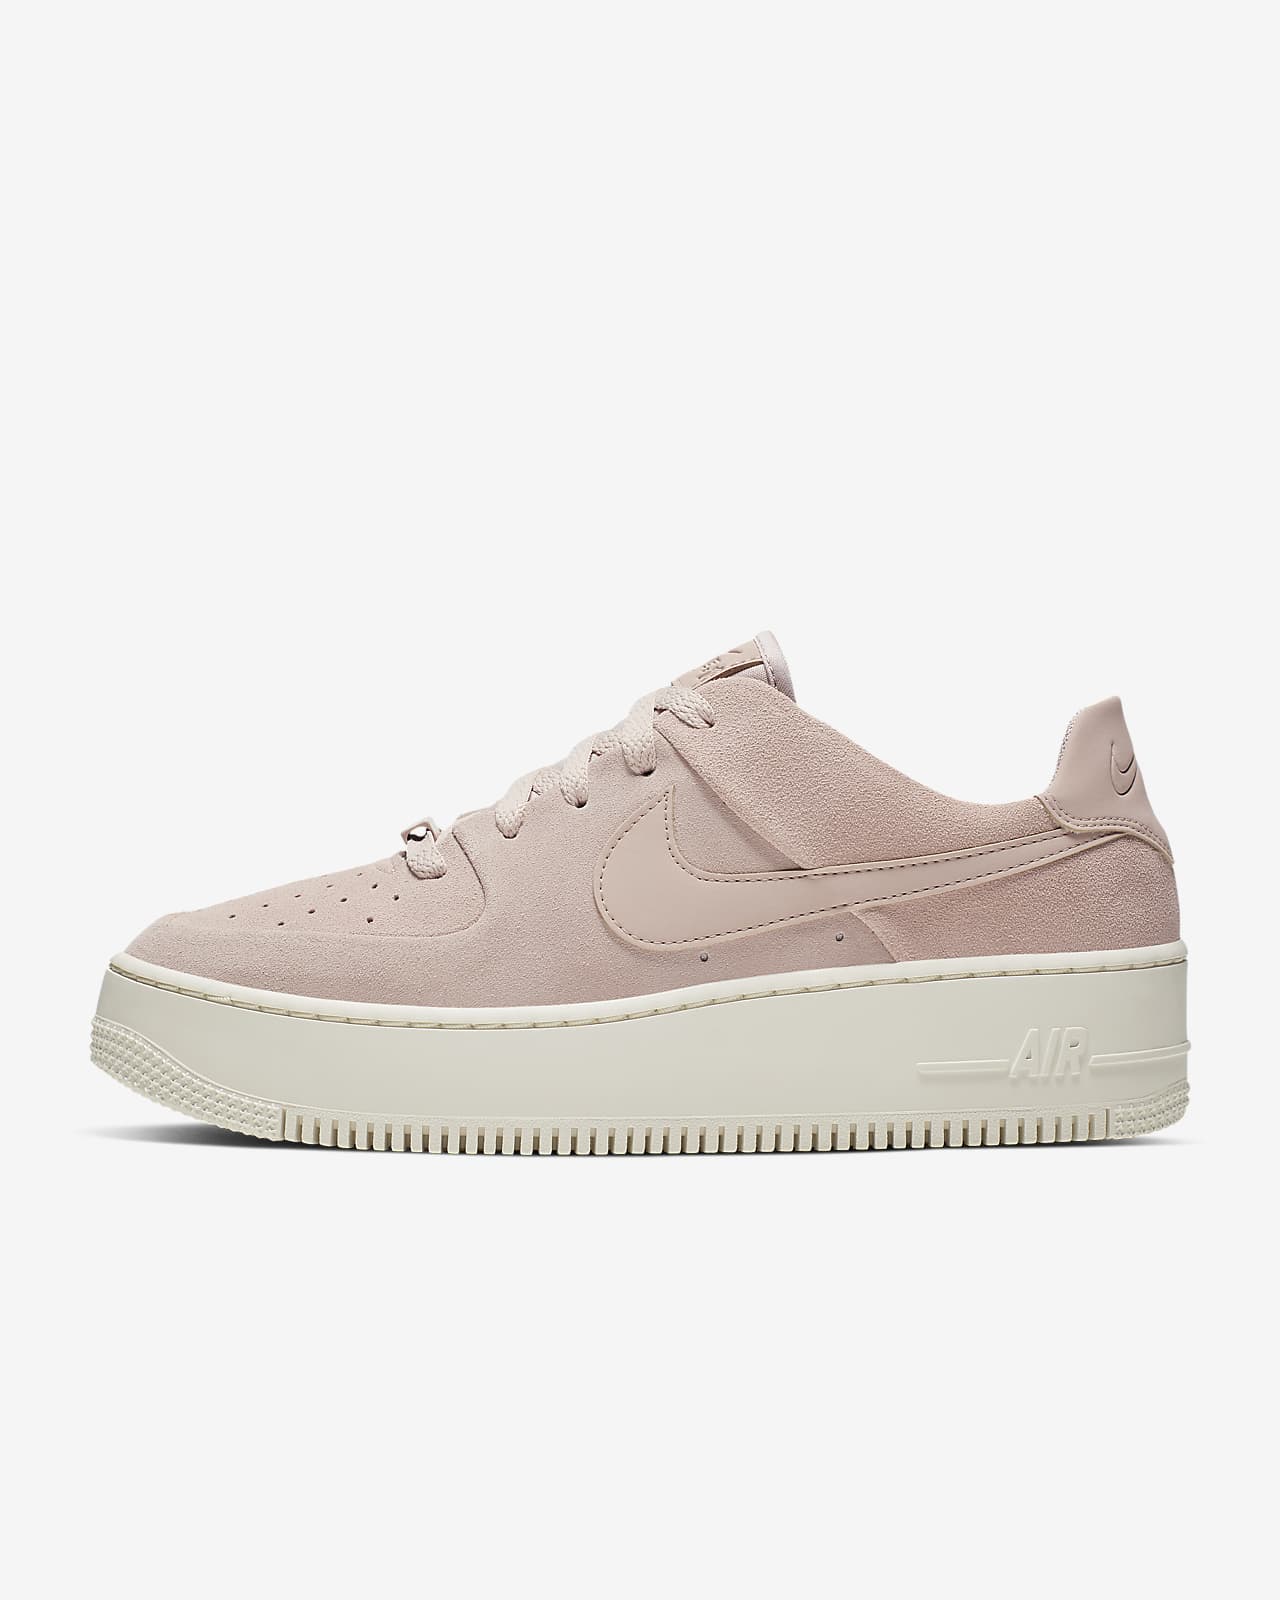 air force 1 sage low women's